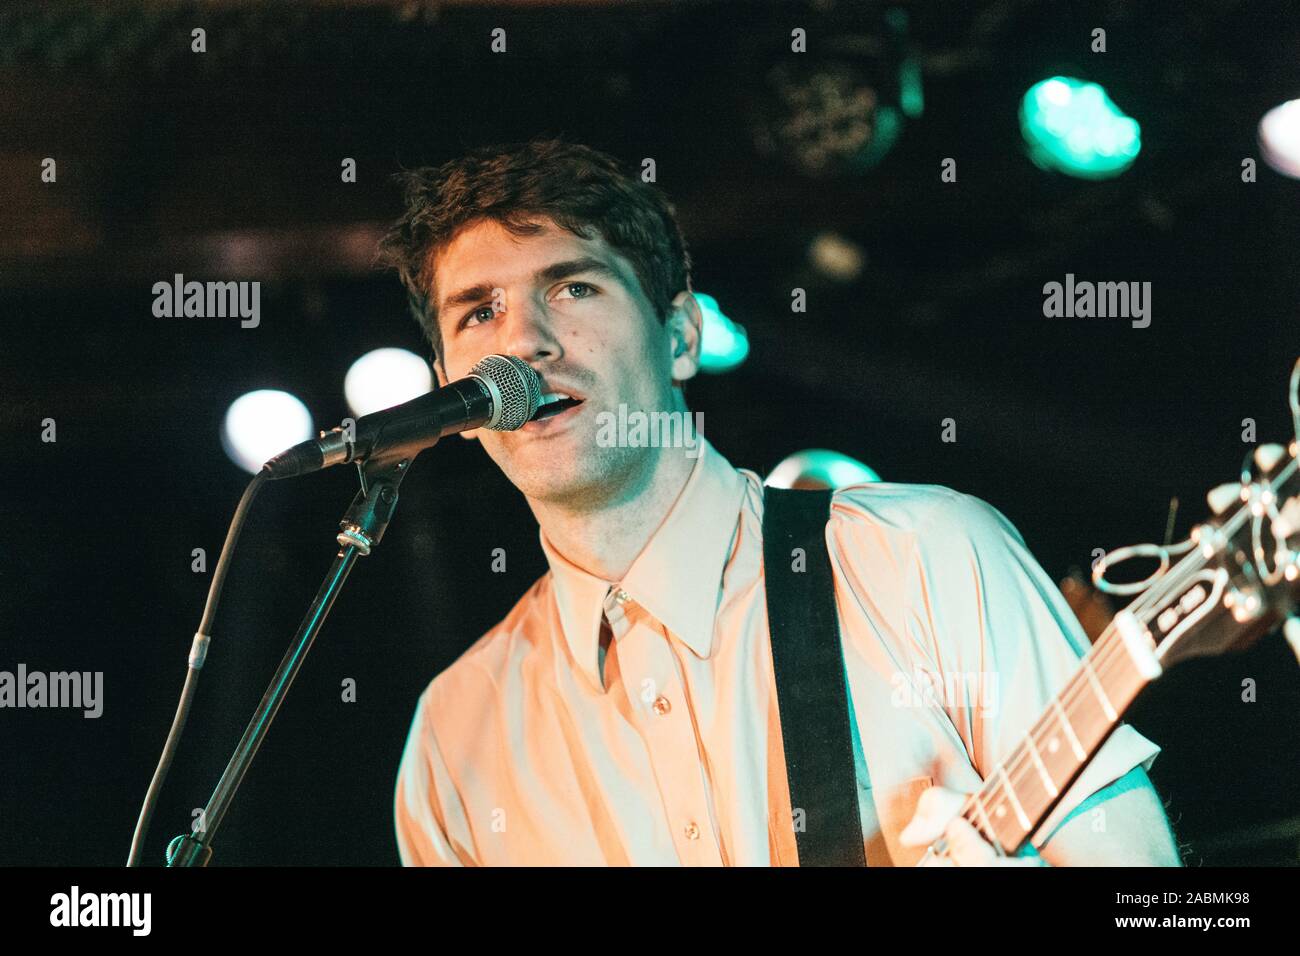 Copenhagen, Denmark. 08th, October 2019. The American band The Dip performs  a live concert at Loppen in Copenhagen. Here singer and musician Tom Eddy  is seen live on stage. (Photo credit: Gonzales